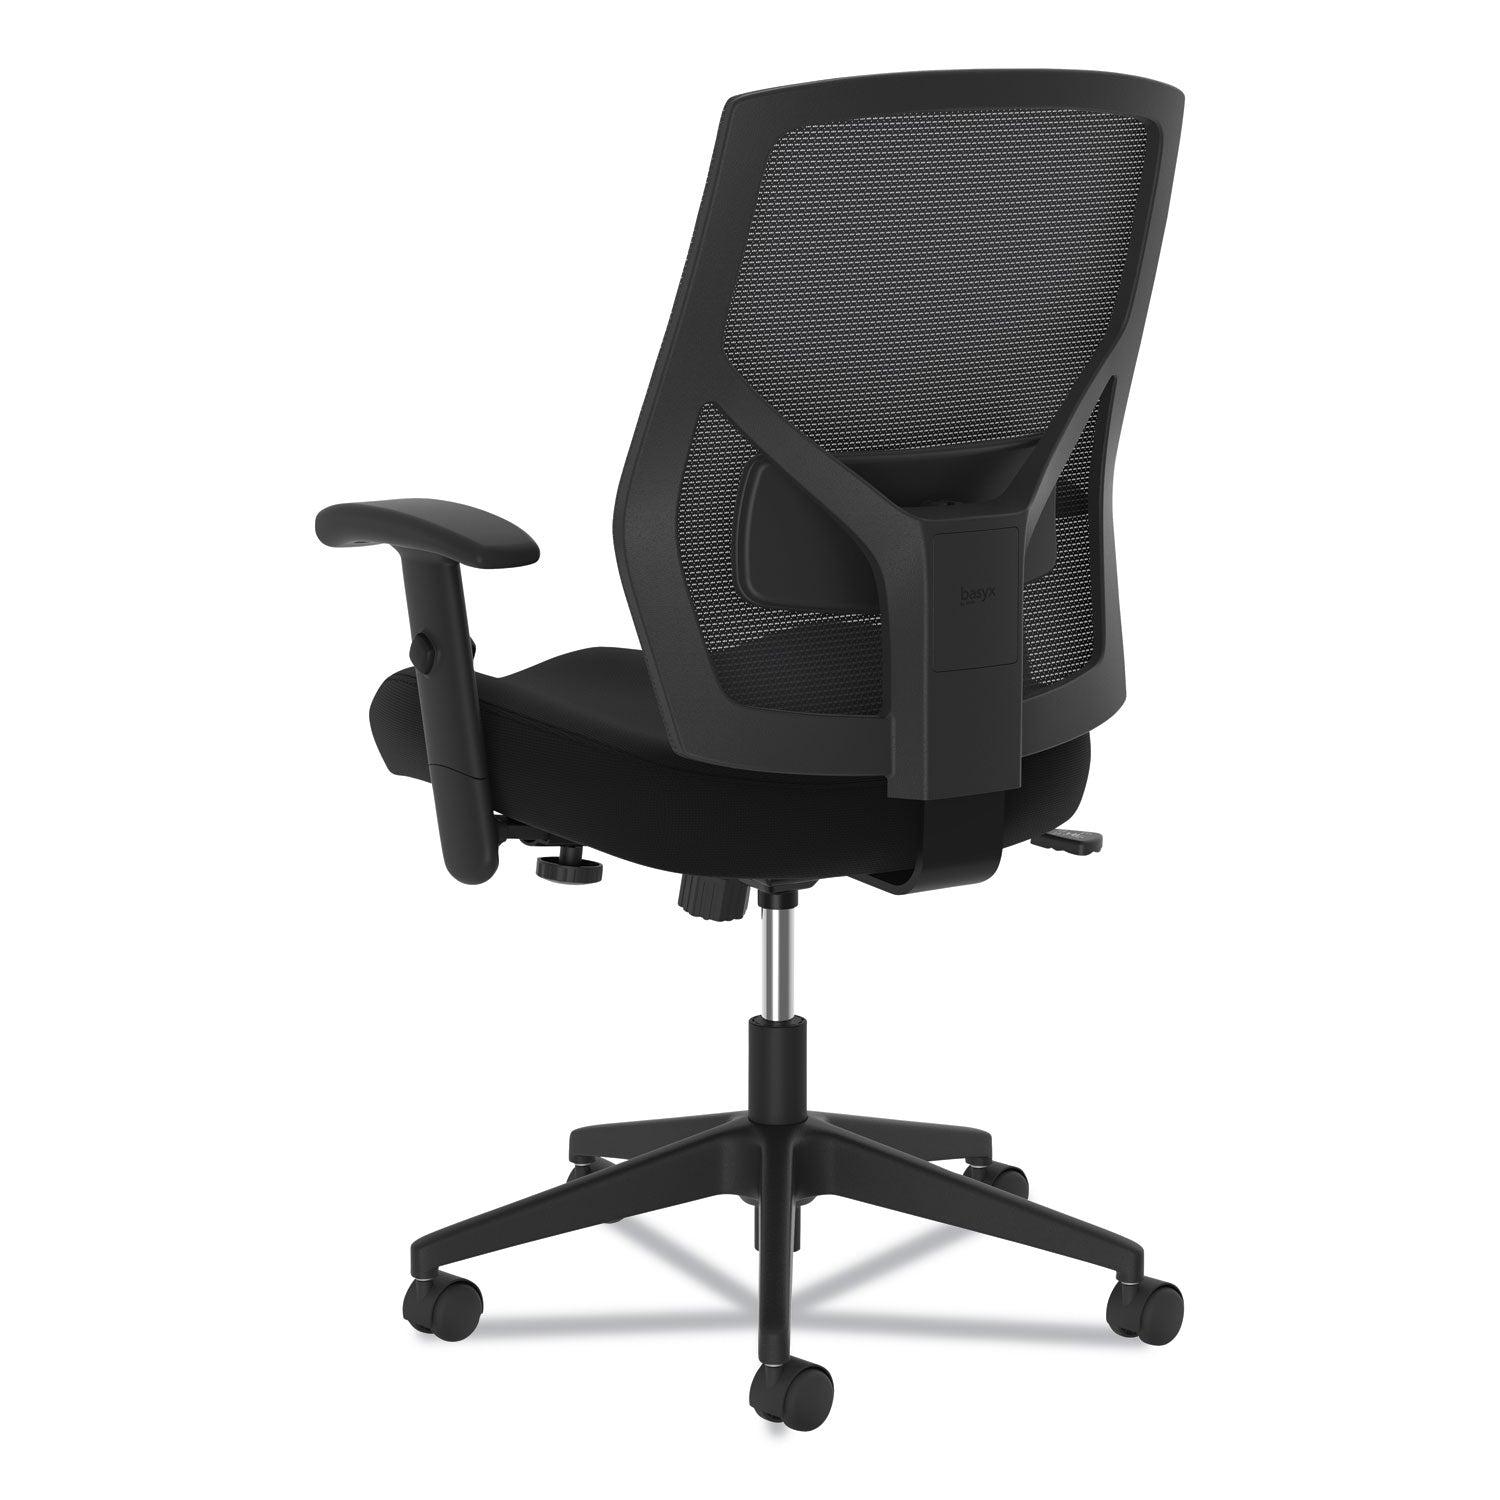 vl581-high-back-task-chair-supports-up-to-250-lb-18-to-22-seat-height-black_bsxvl581es10t - 4